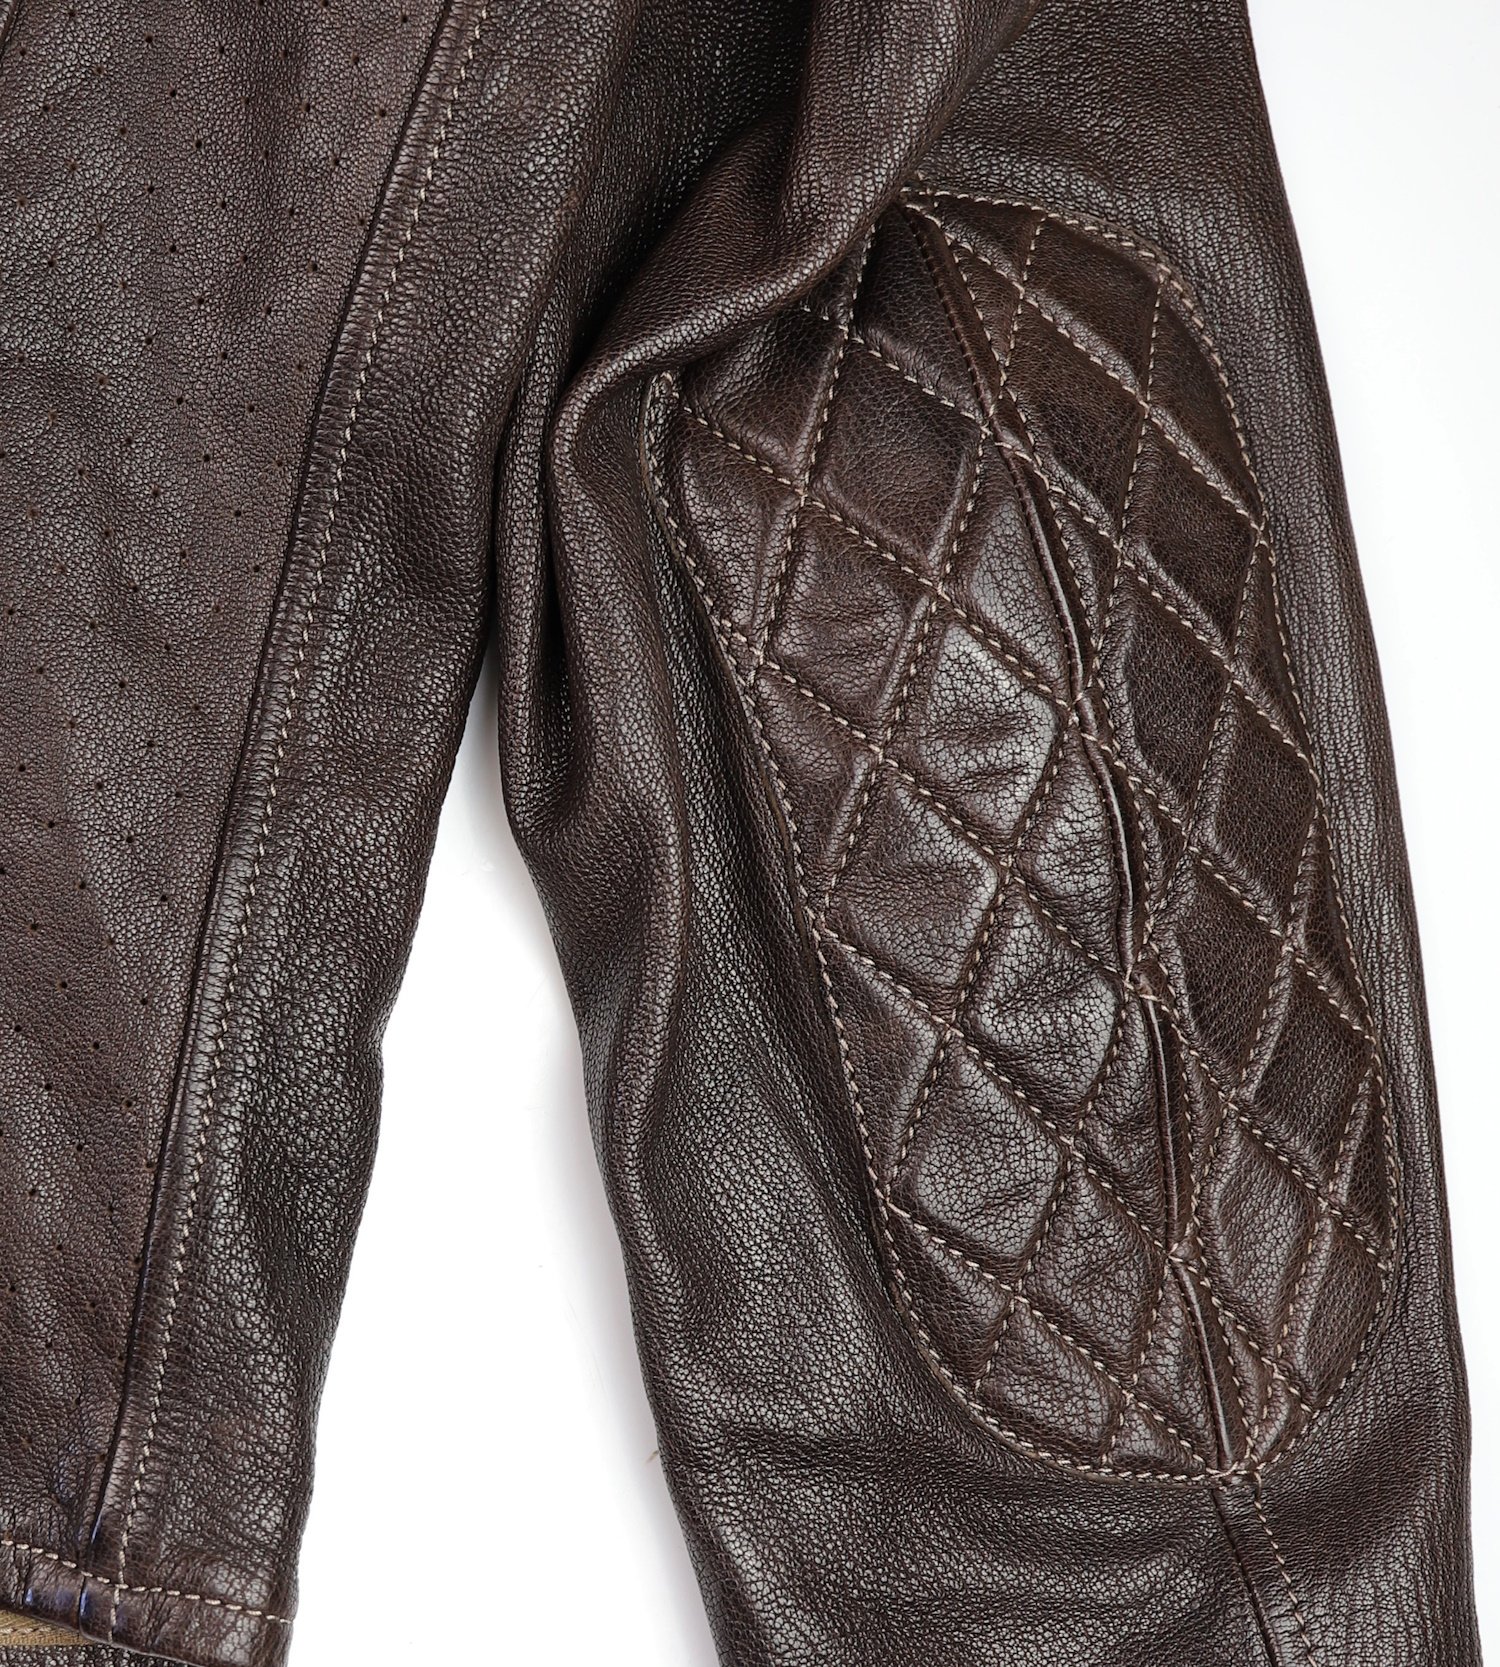 Thedi Maximos Cafe Racer Brown Calabria Goatskin Large elbow quilting.jpg